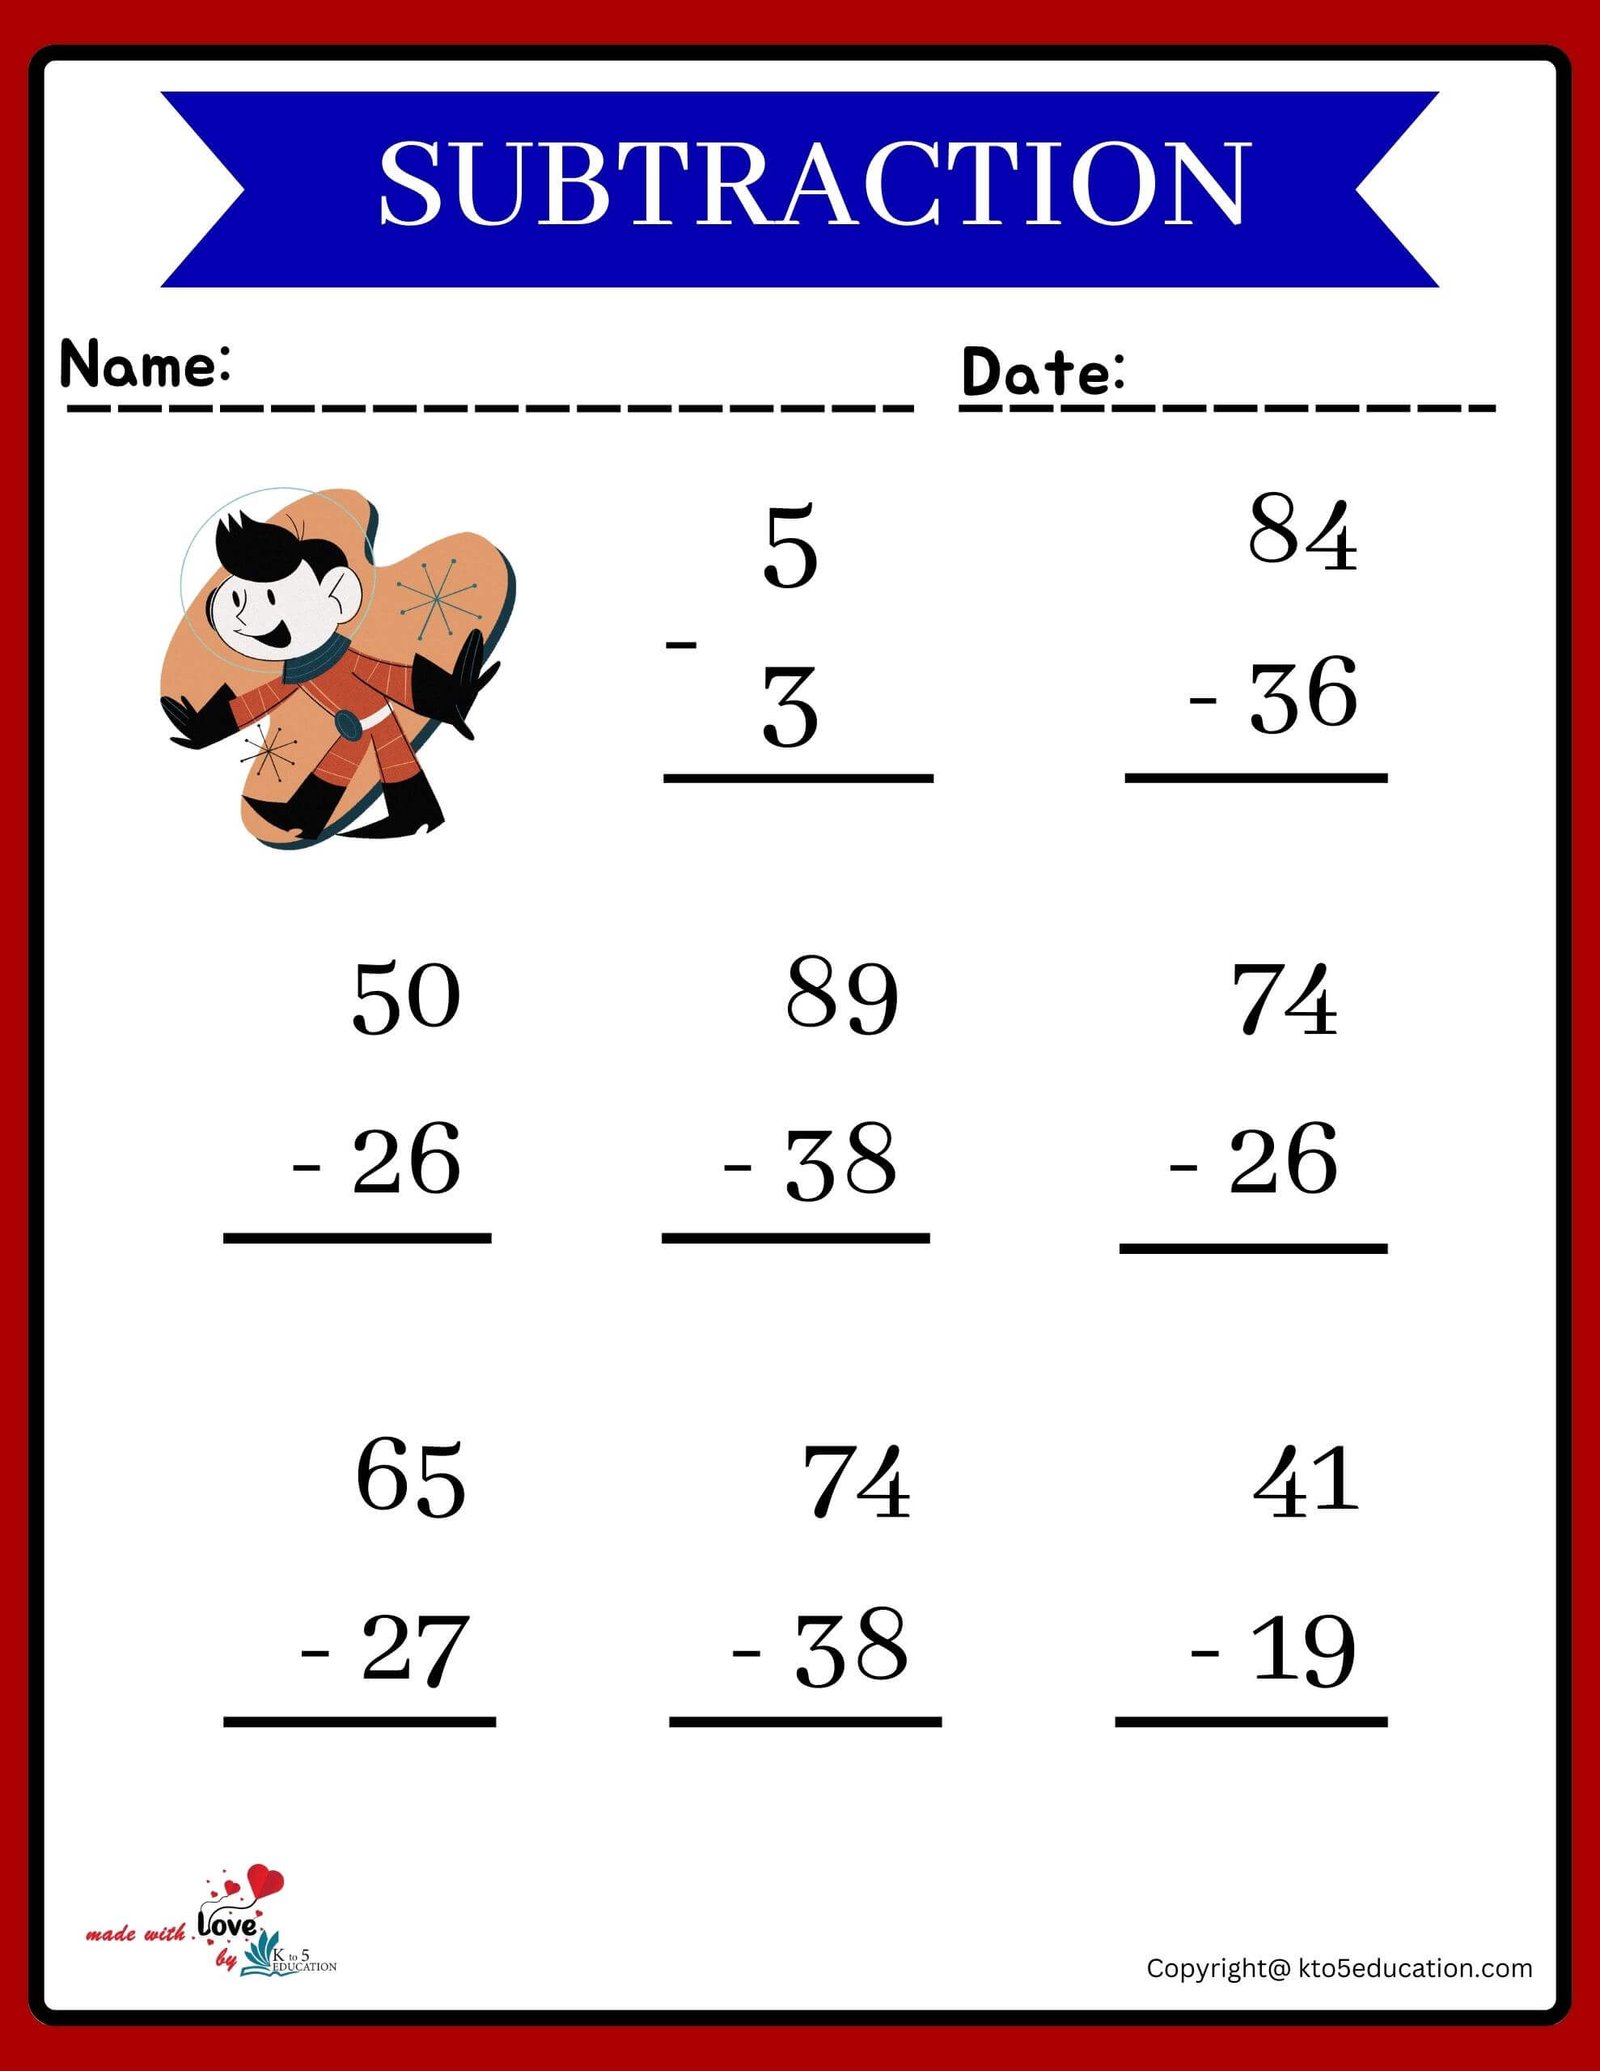 Subtraction Tables and Charts